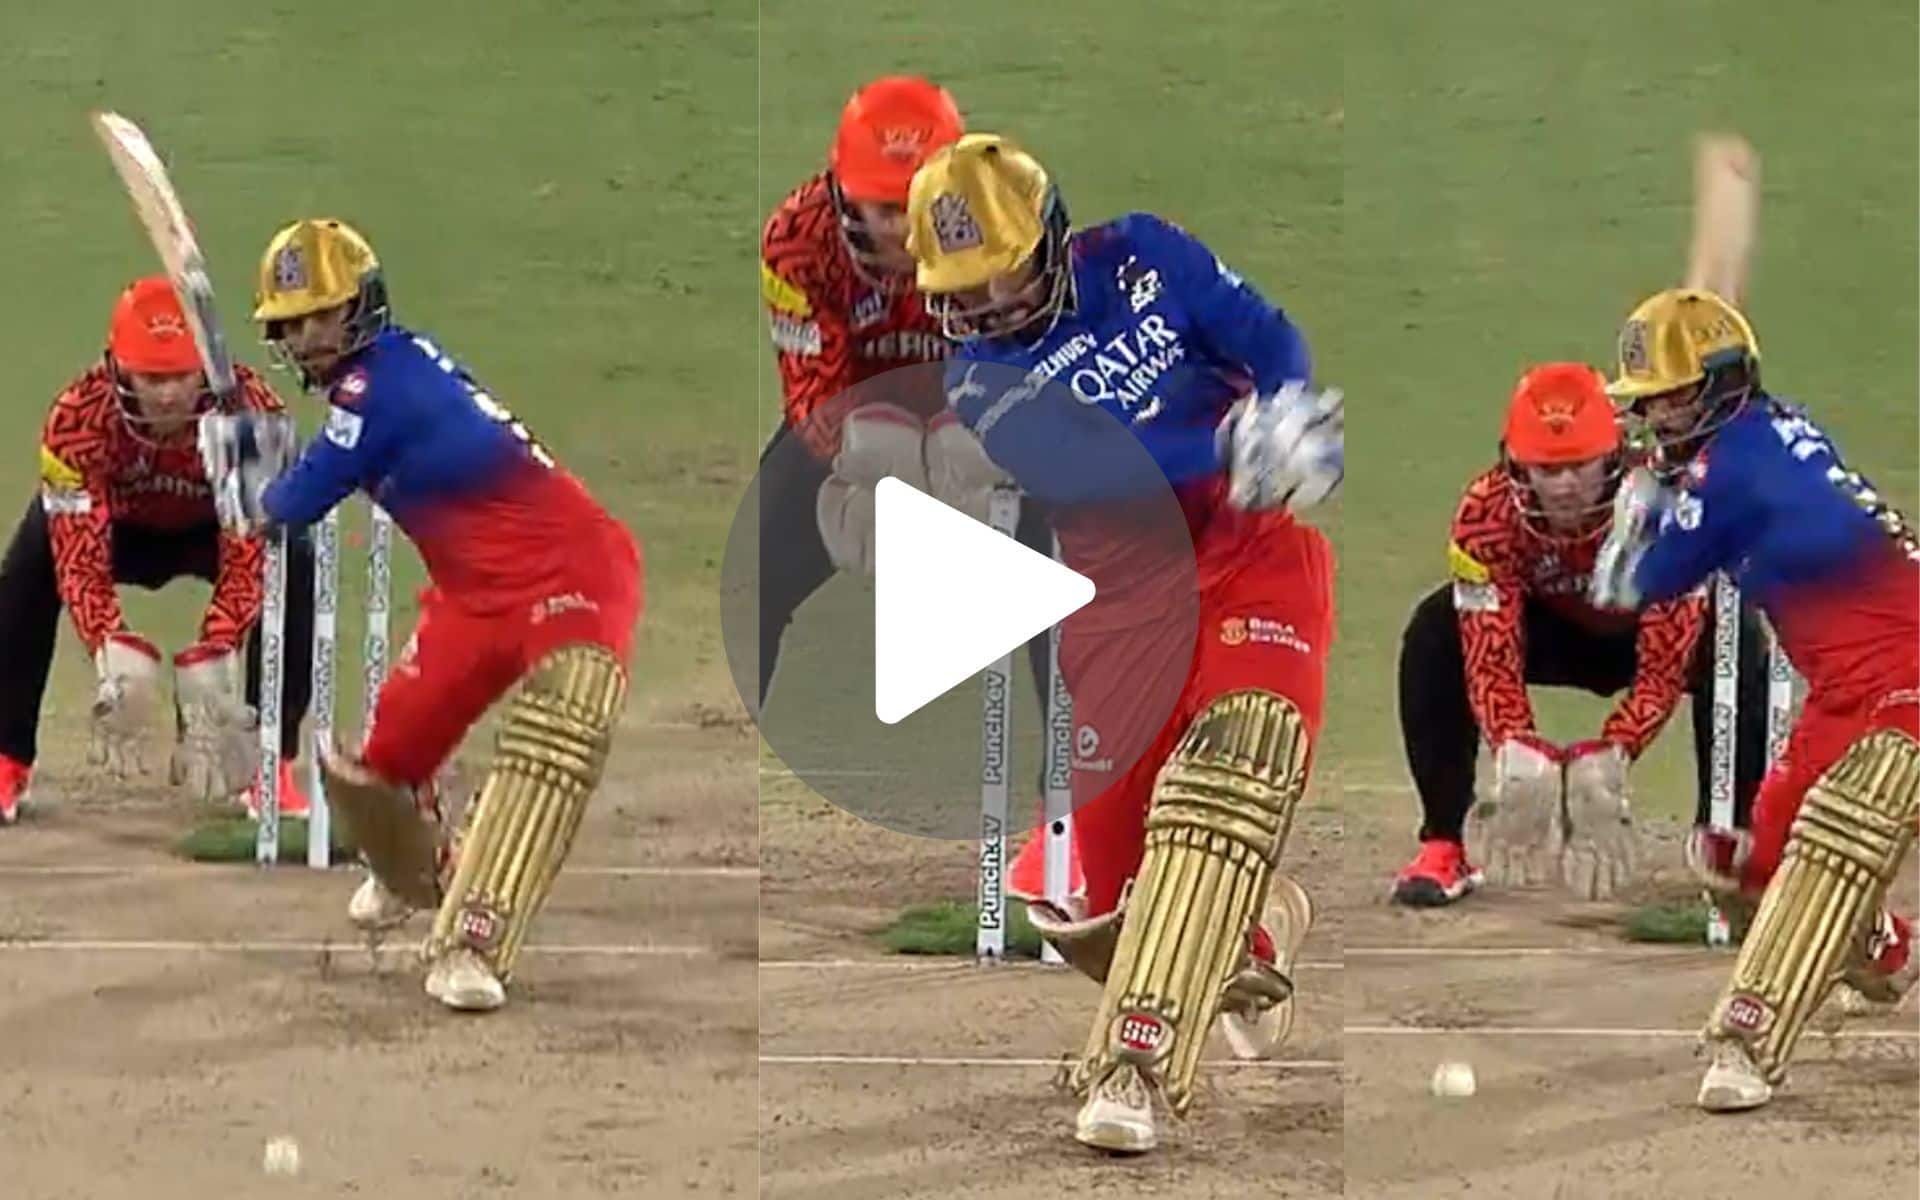 [Watch] 6,6,6,6 - Rajat Patidar Goes Crazy With Four Consecutive Sixes Against  Markande
